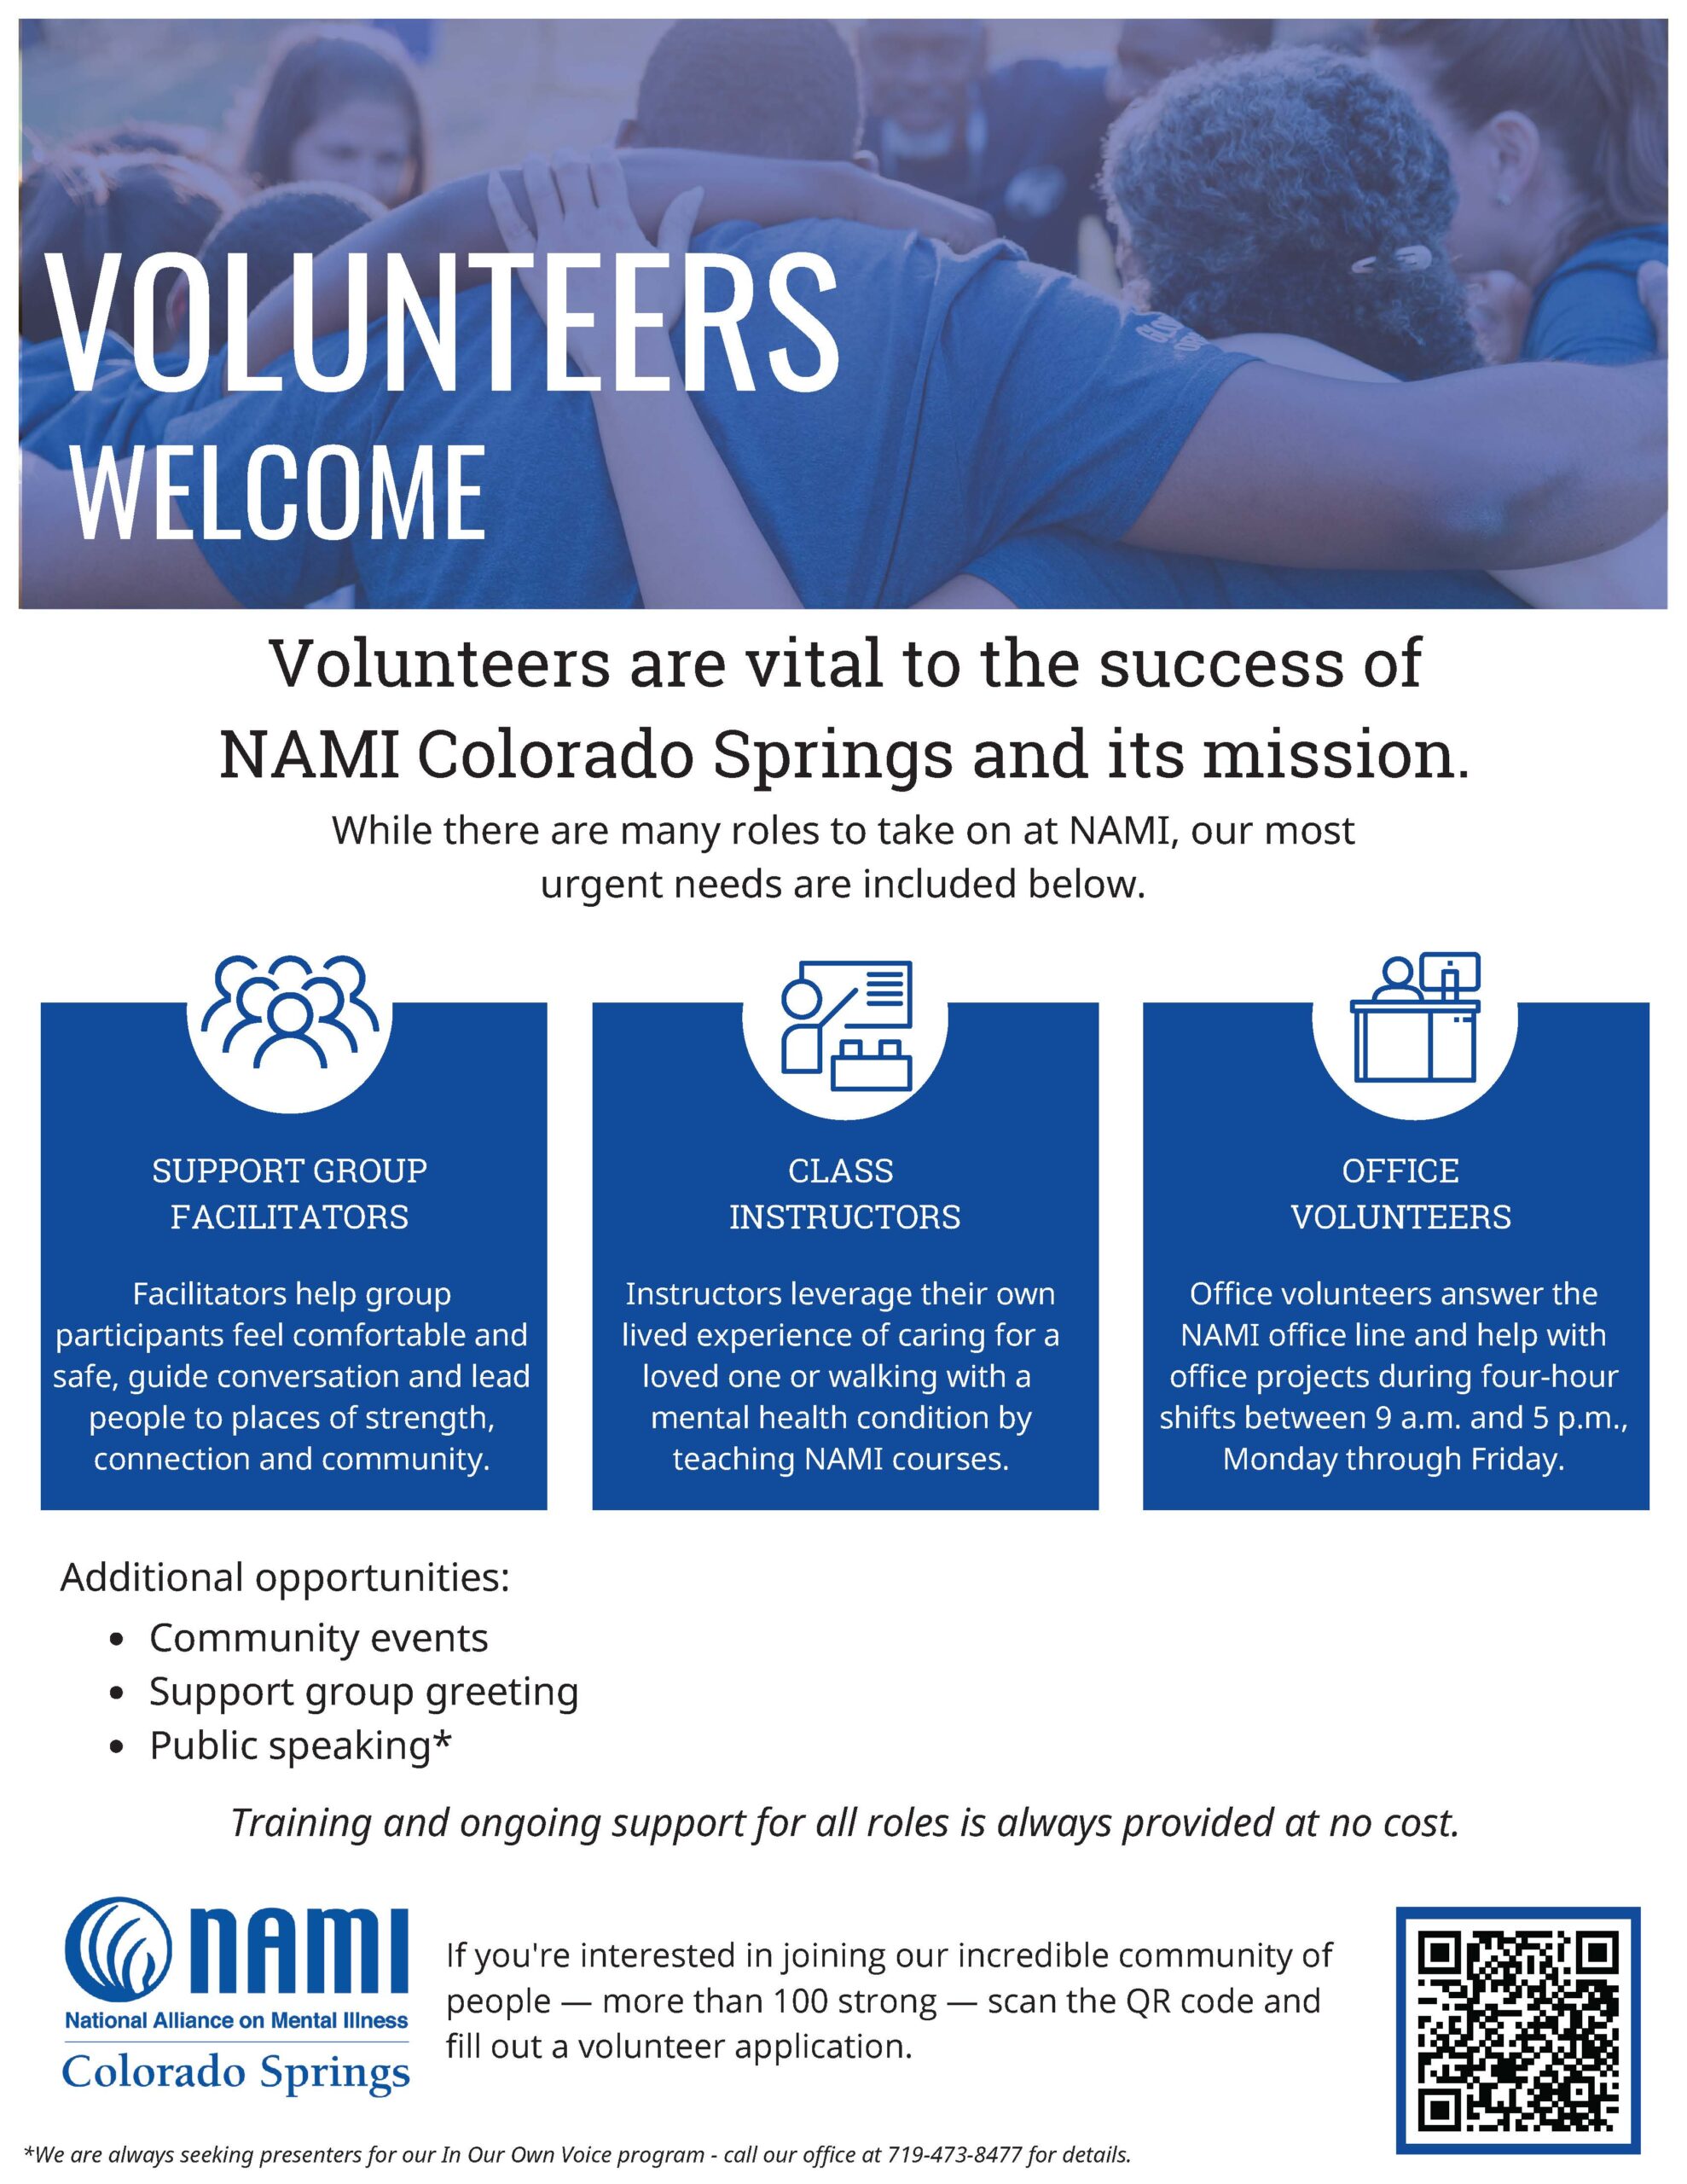 Volunteers are vital to the success of NAMI Colorado Springs and its mission. While there are many roles to take on at NAMI, our most urgent needs are included below. Facilitators help group participants feel comfortable and safe, guide conversation and lead people to places of strength, connection, and community.